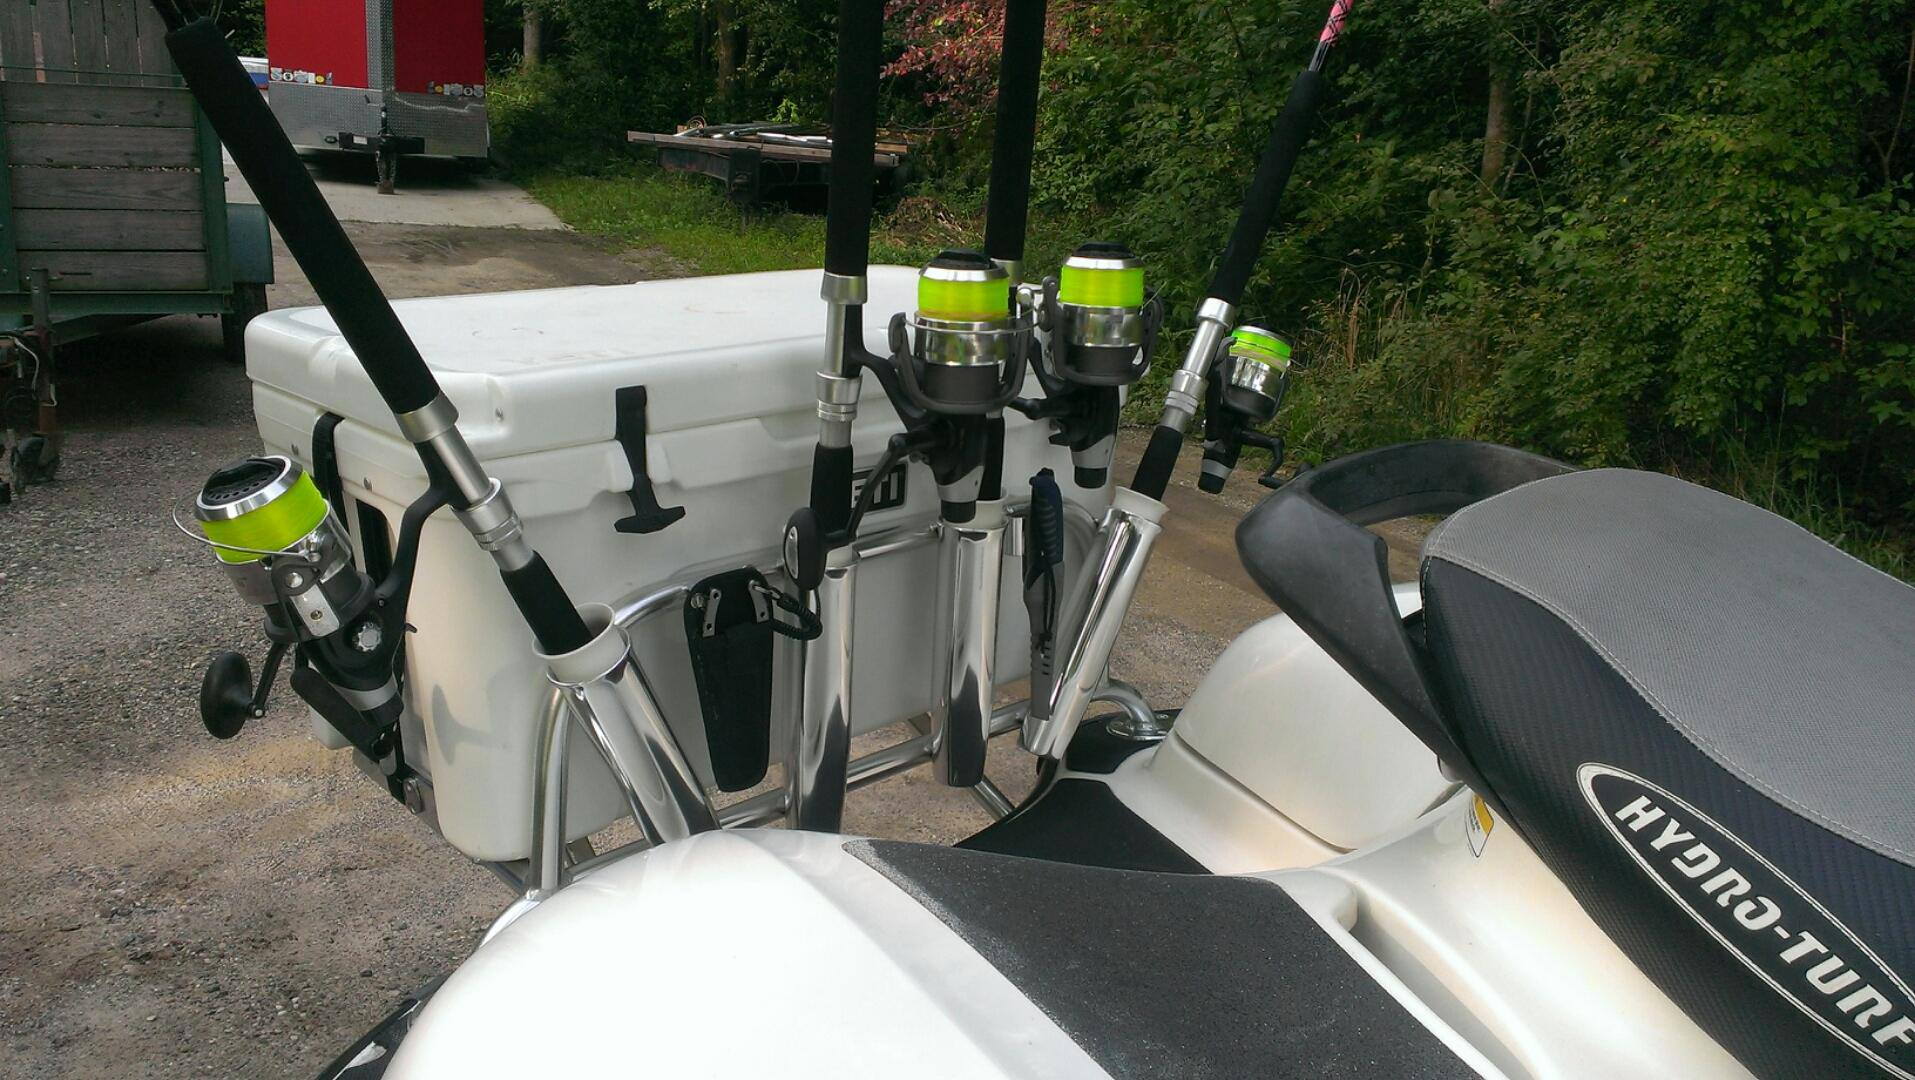 DIY fishing rod holders I did today (no drilling)